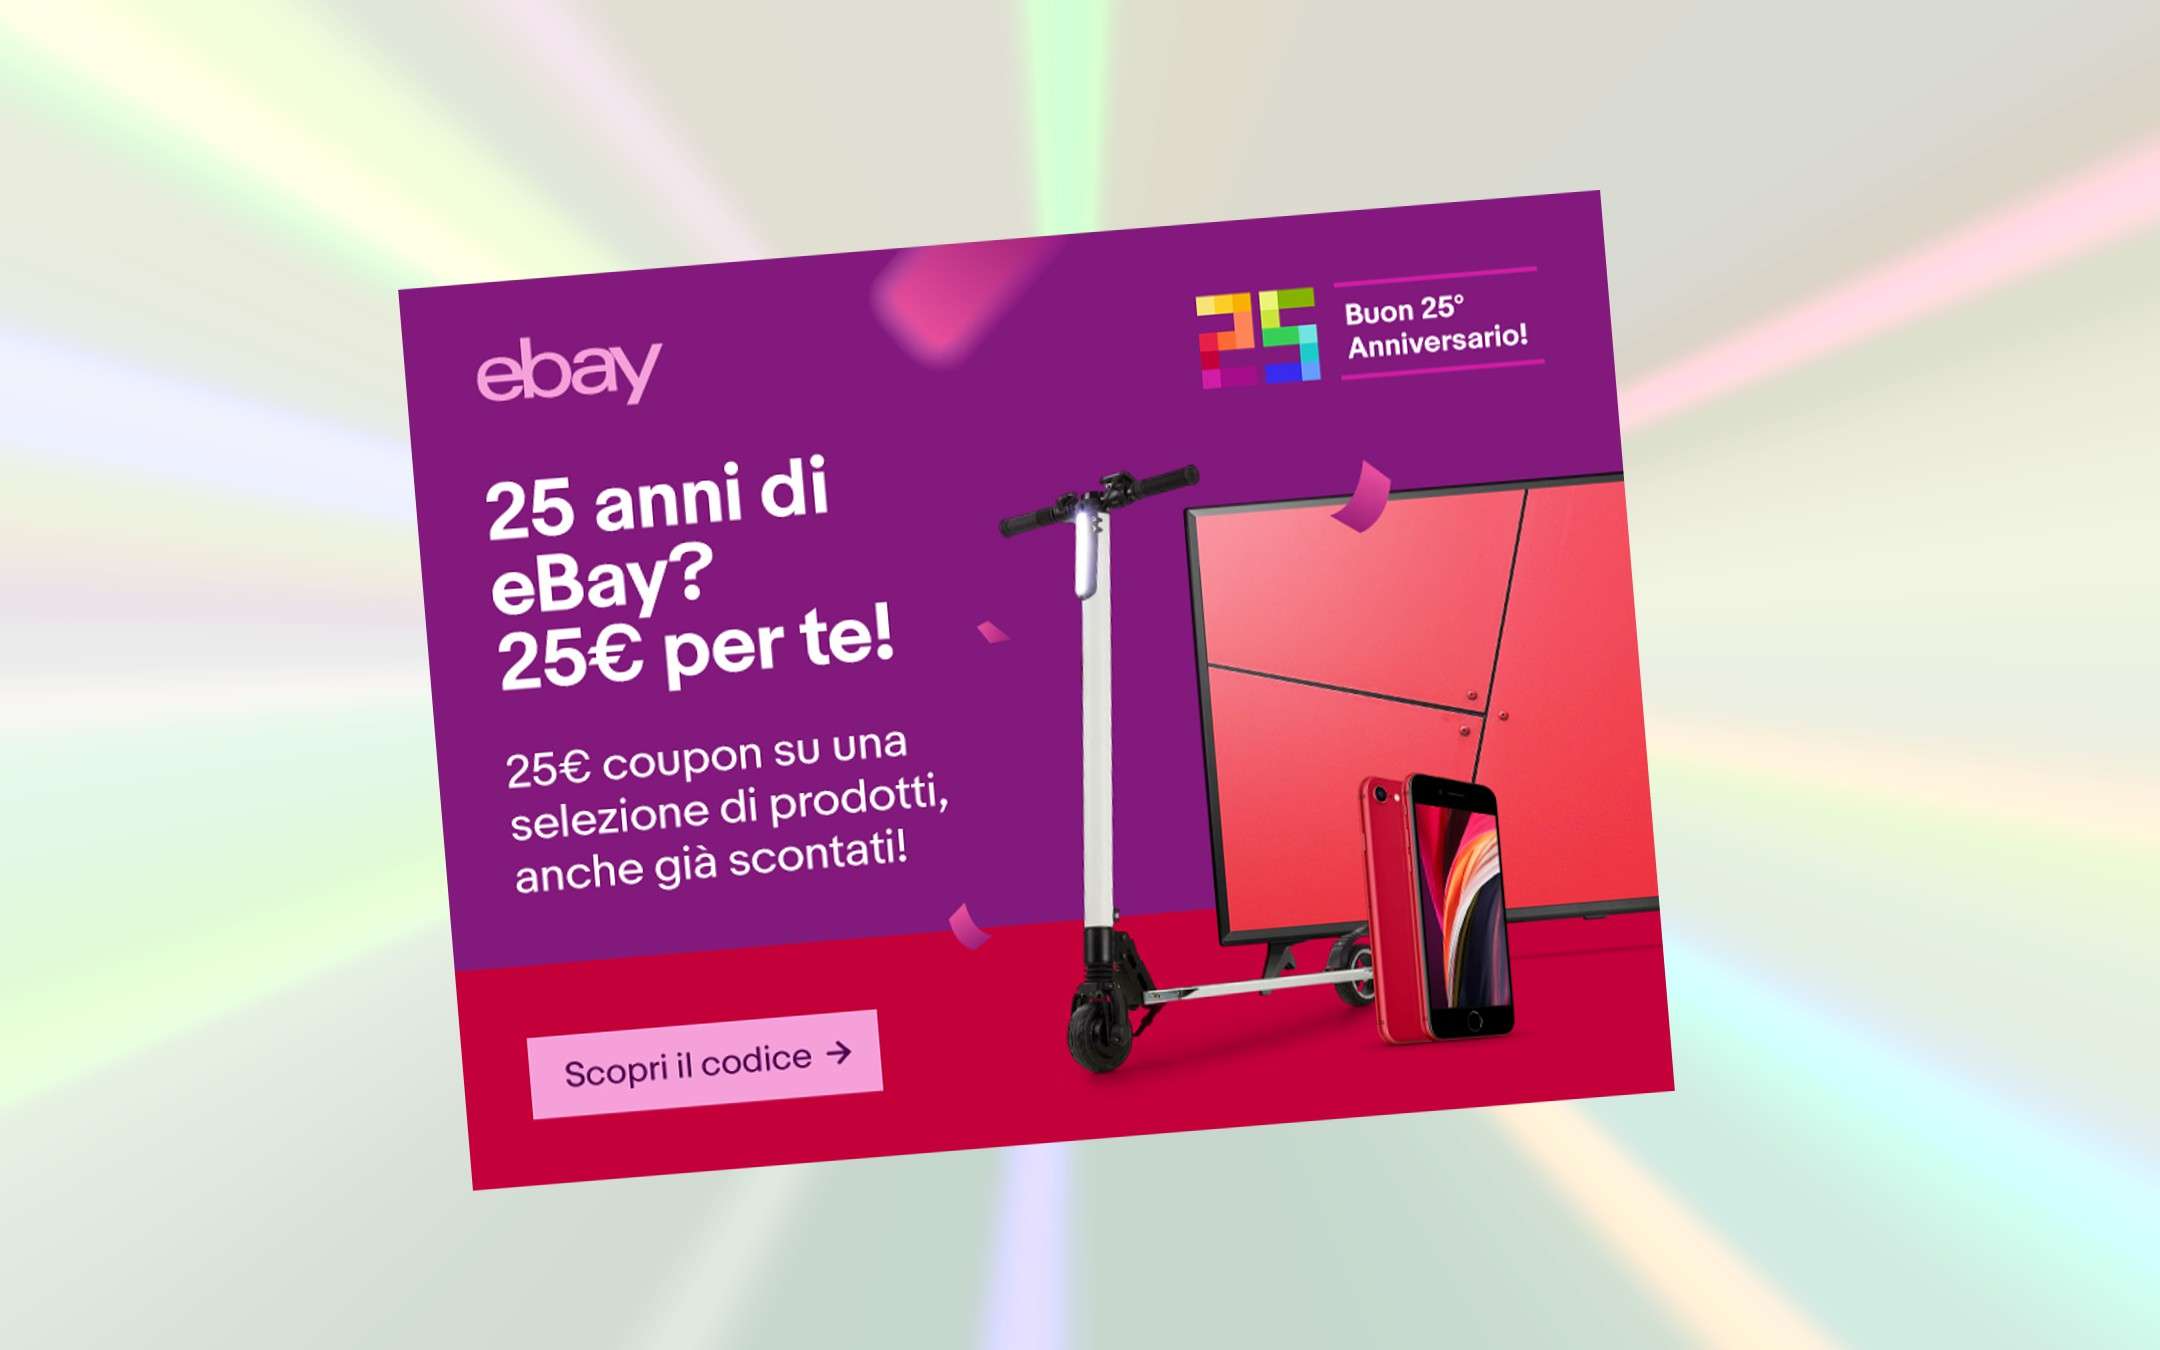 25 euros discount for eBay's 25 years